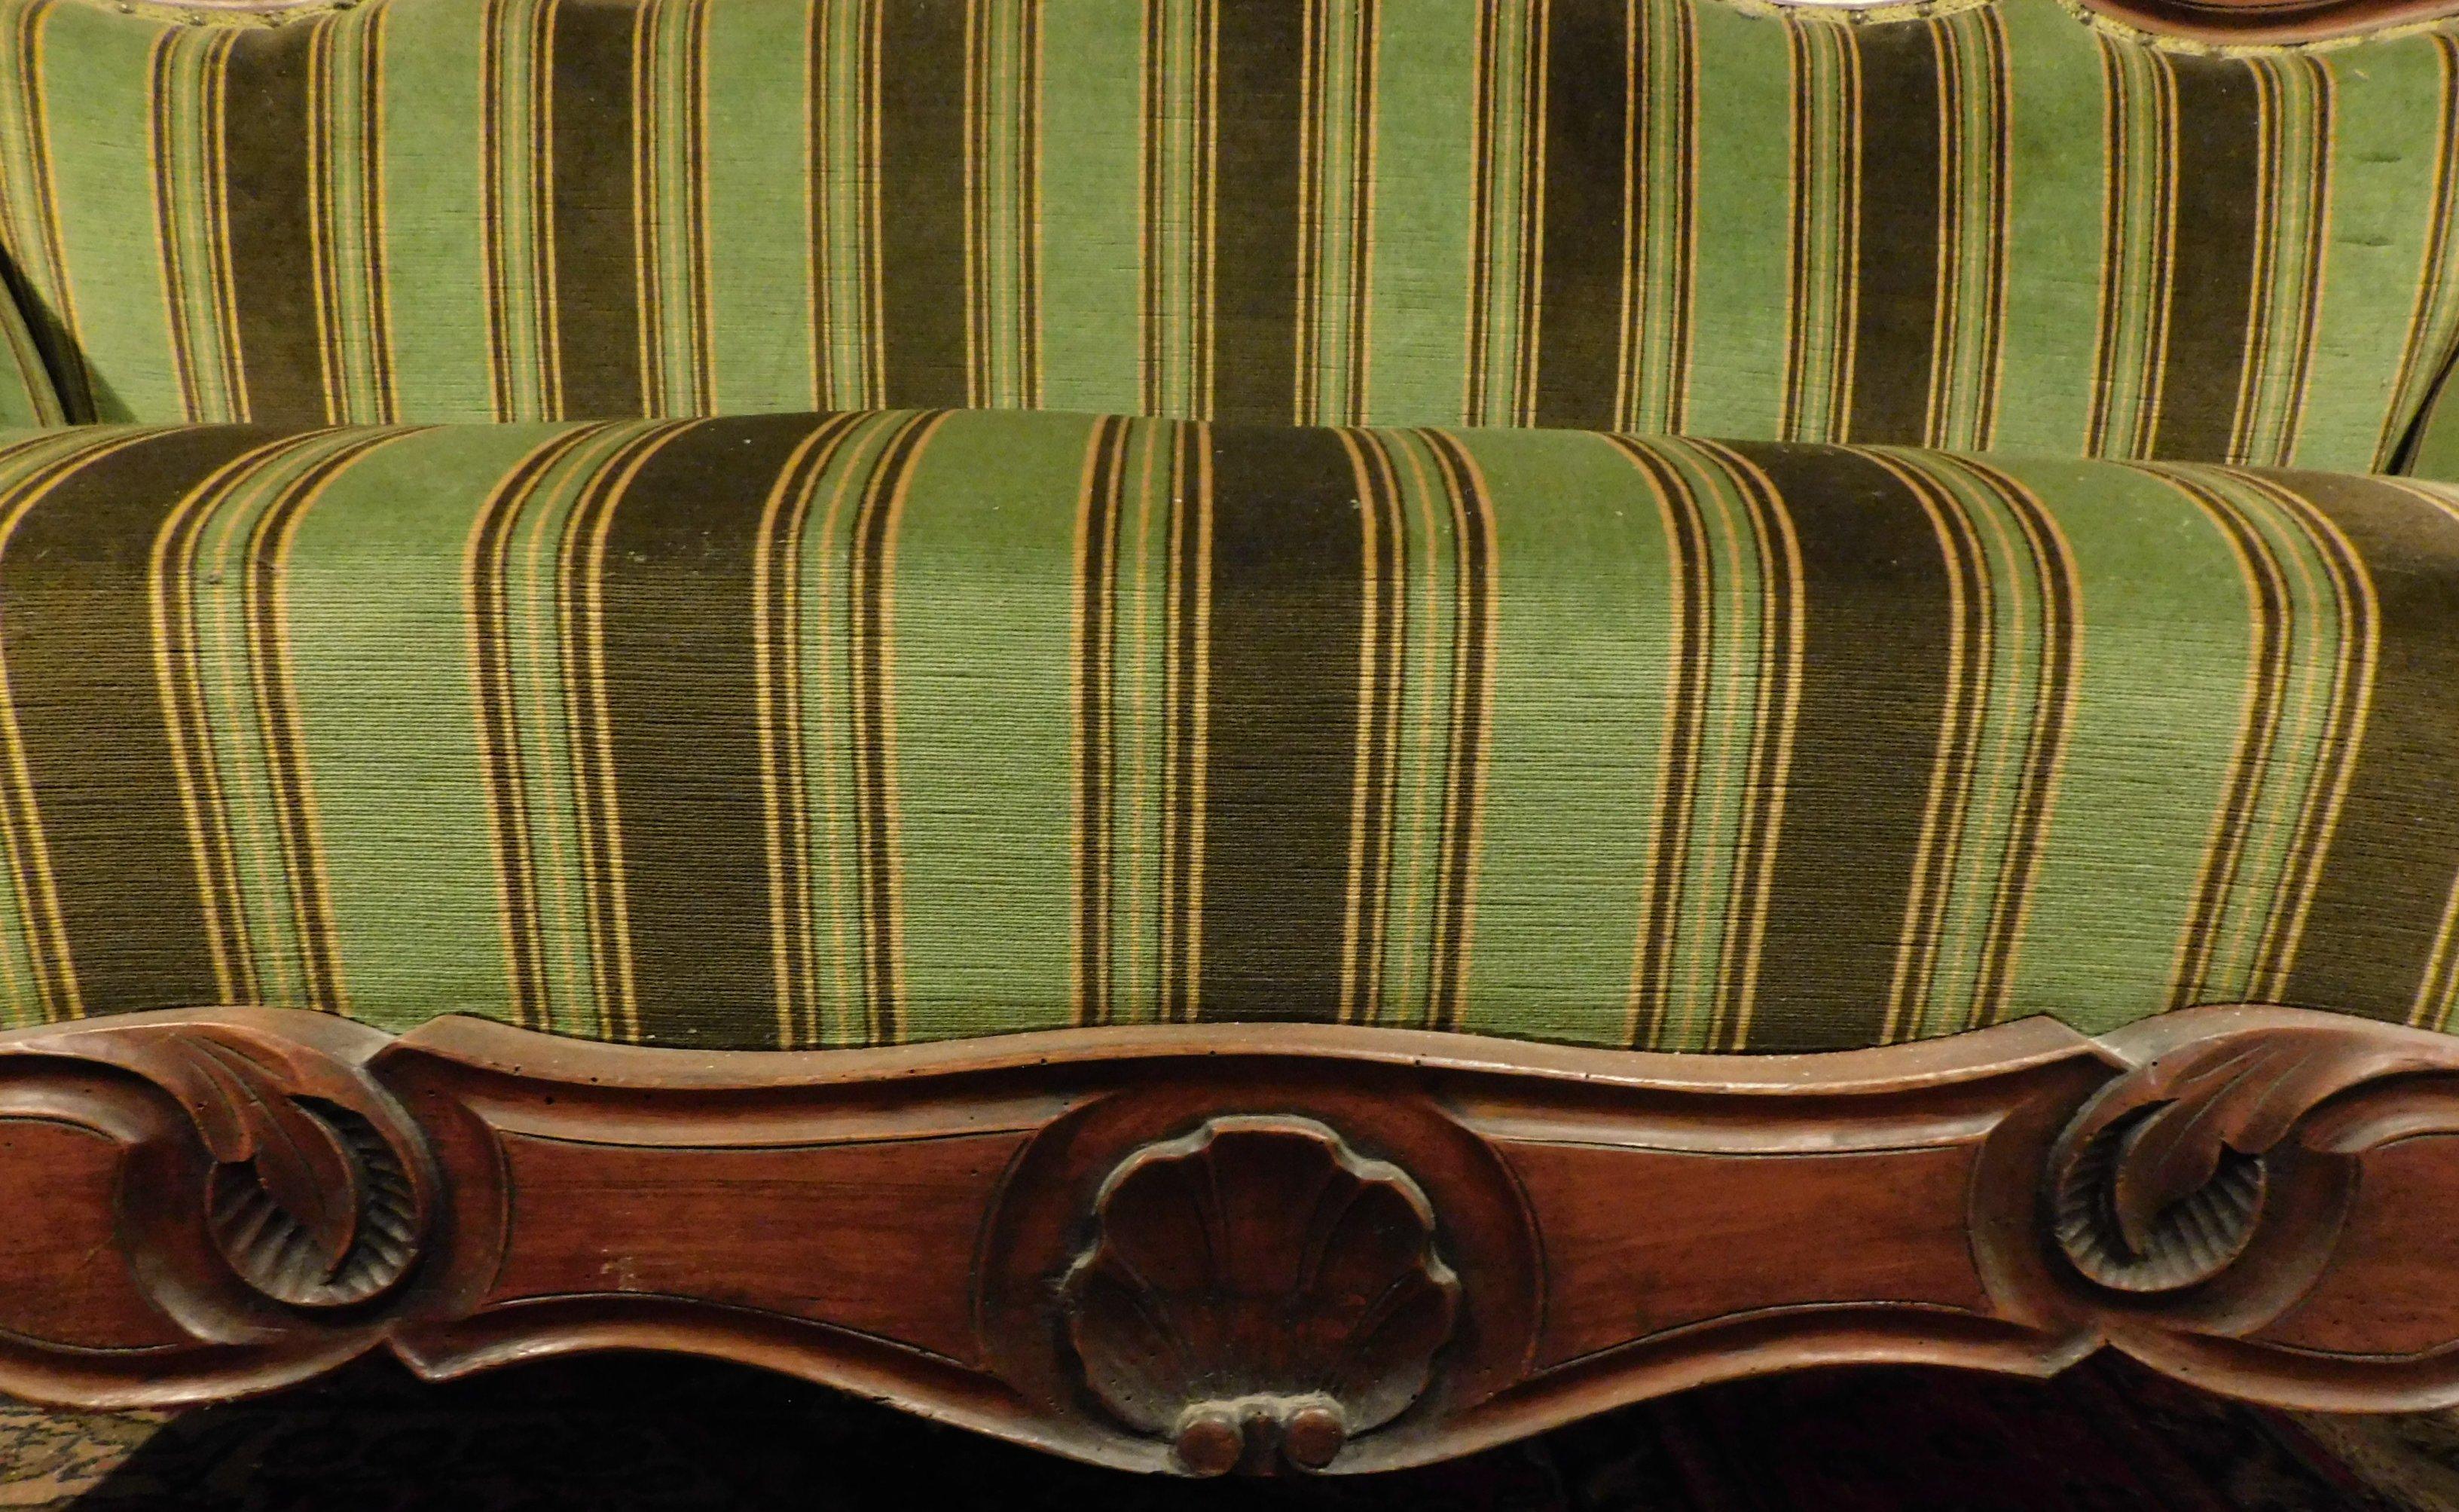 Hand-Carved Antique Louis Philippe Sofa in Inlay Walnut and Green Fabric, 19th Century Italy For Sale